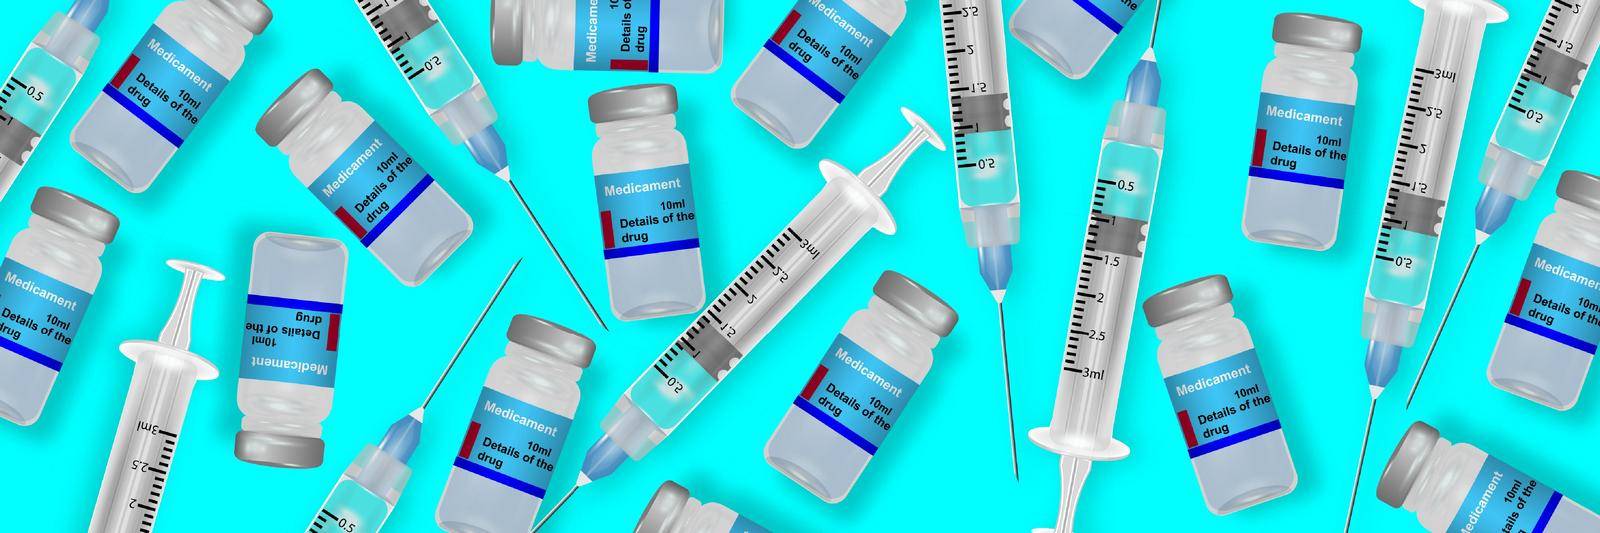 Medicine bottle and syringe. vials and syringe for injection vaccine. Covid19 coronavirus vaccine concept for web banner design, banner background